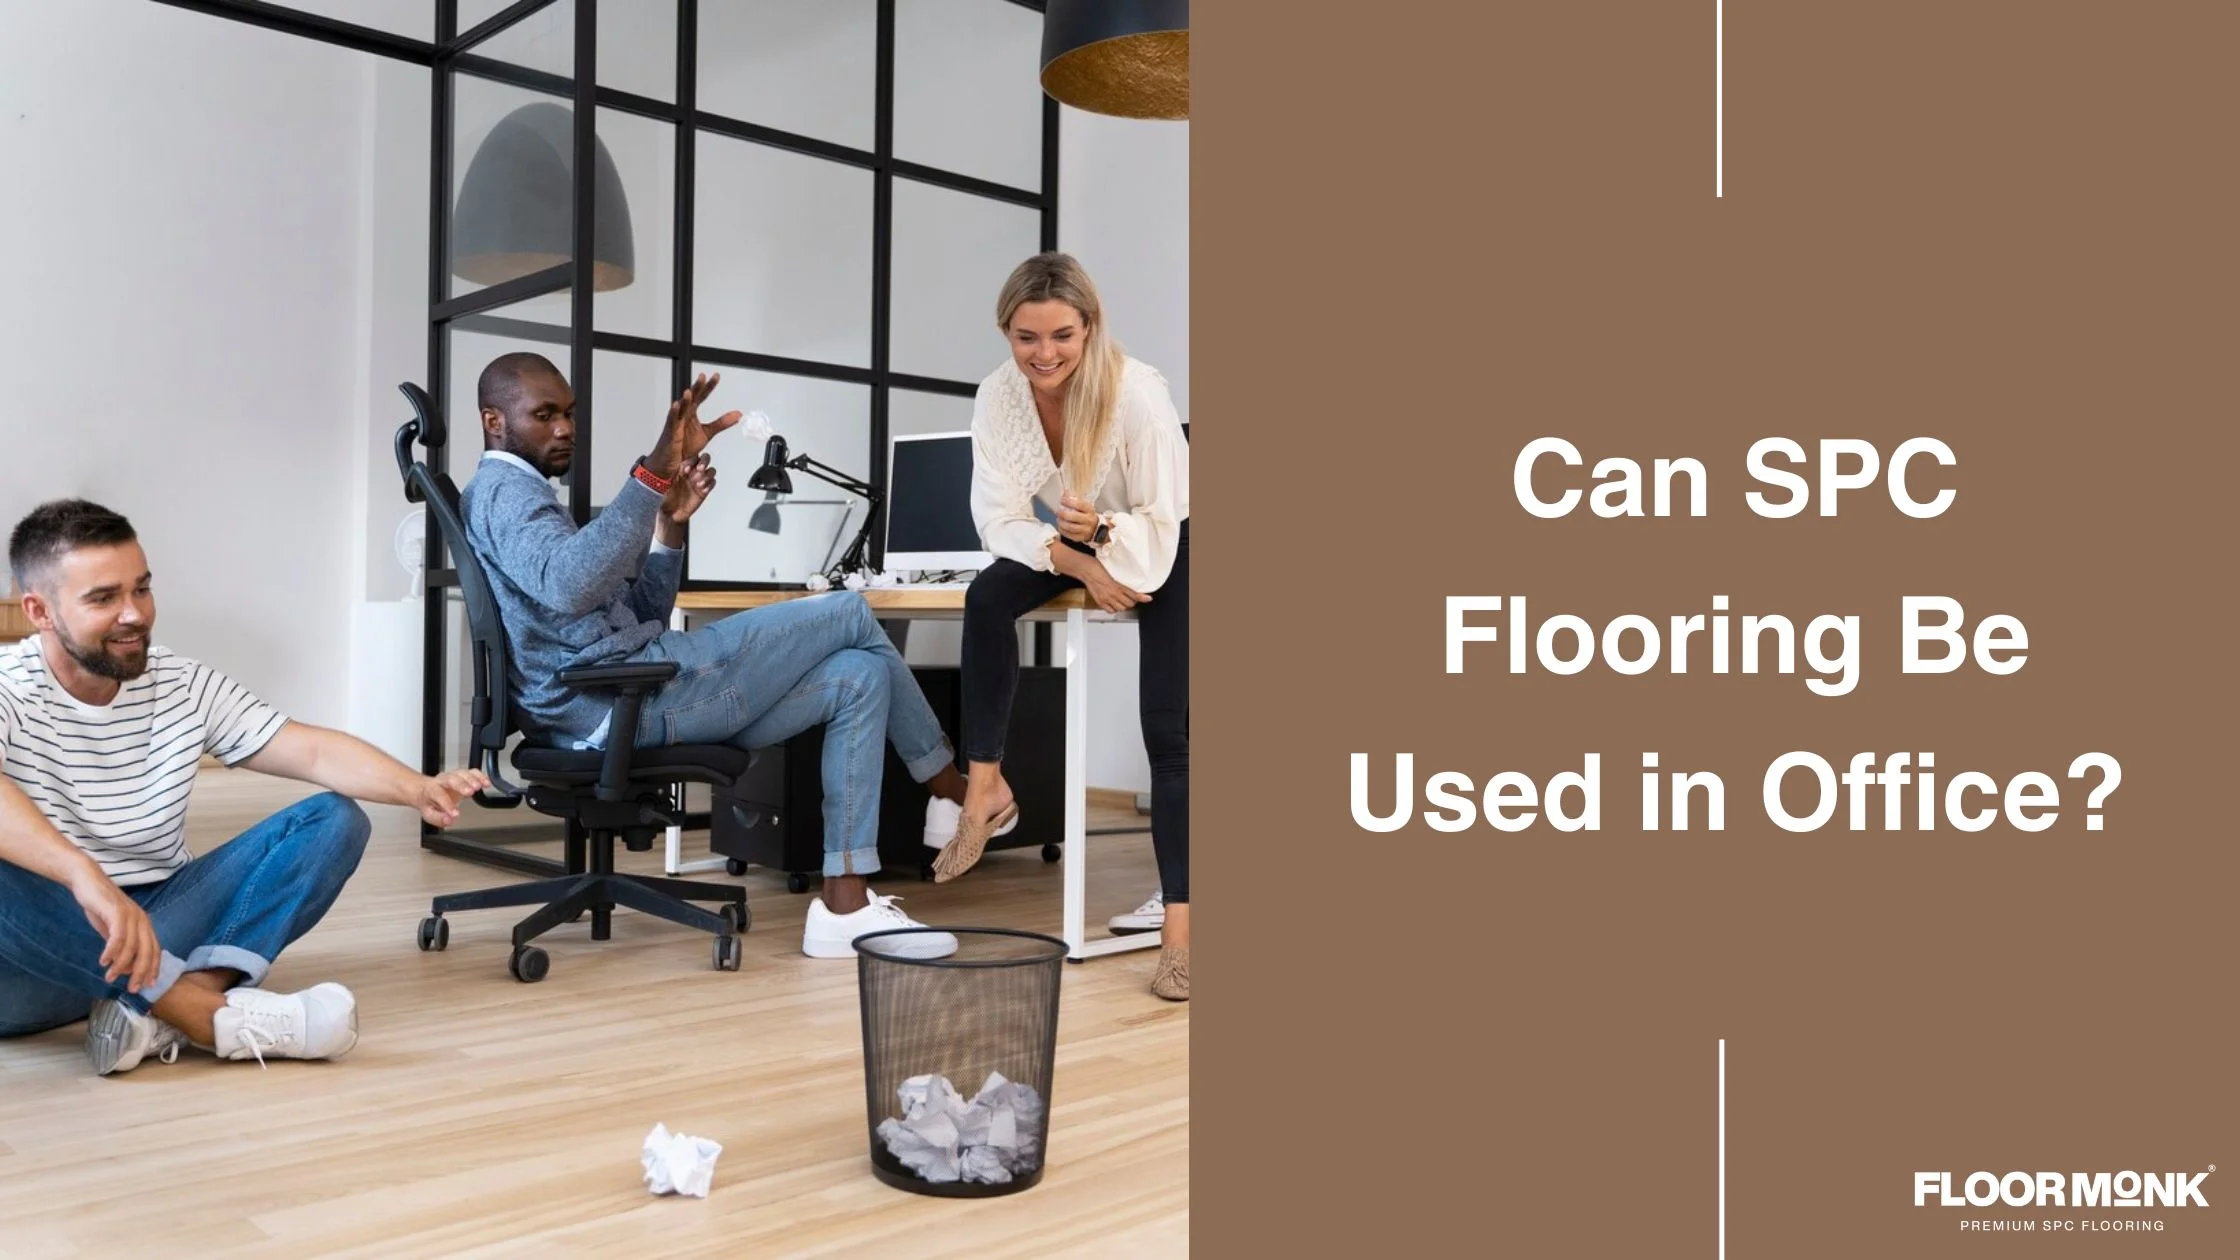 Can SPC Flooring Be Used In Office?